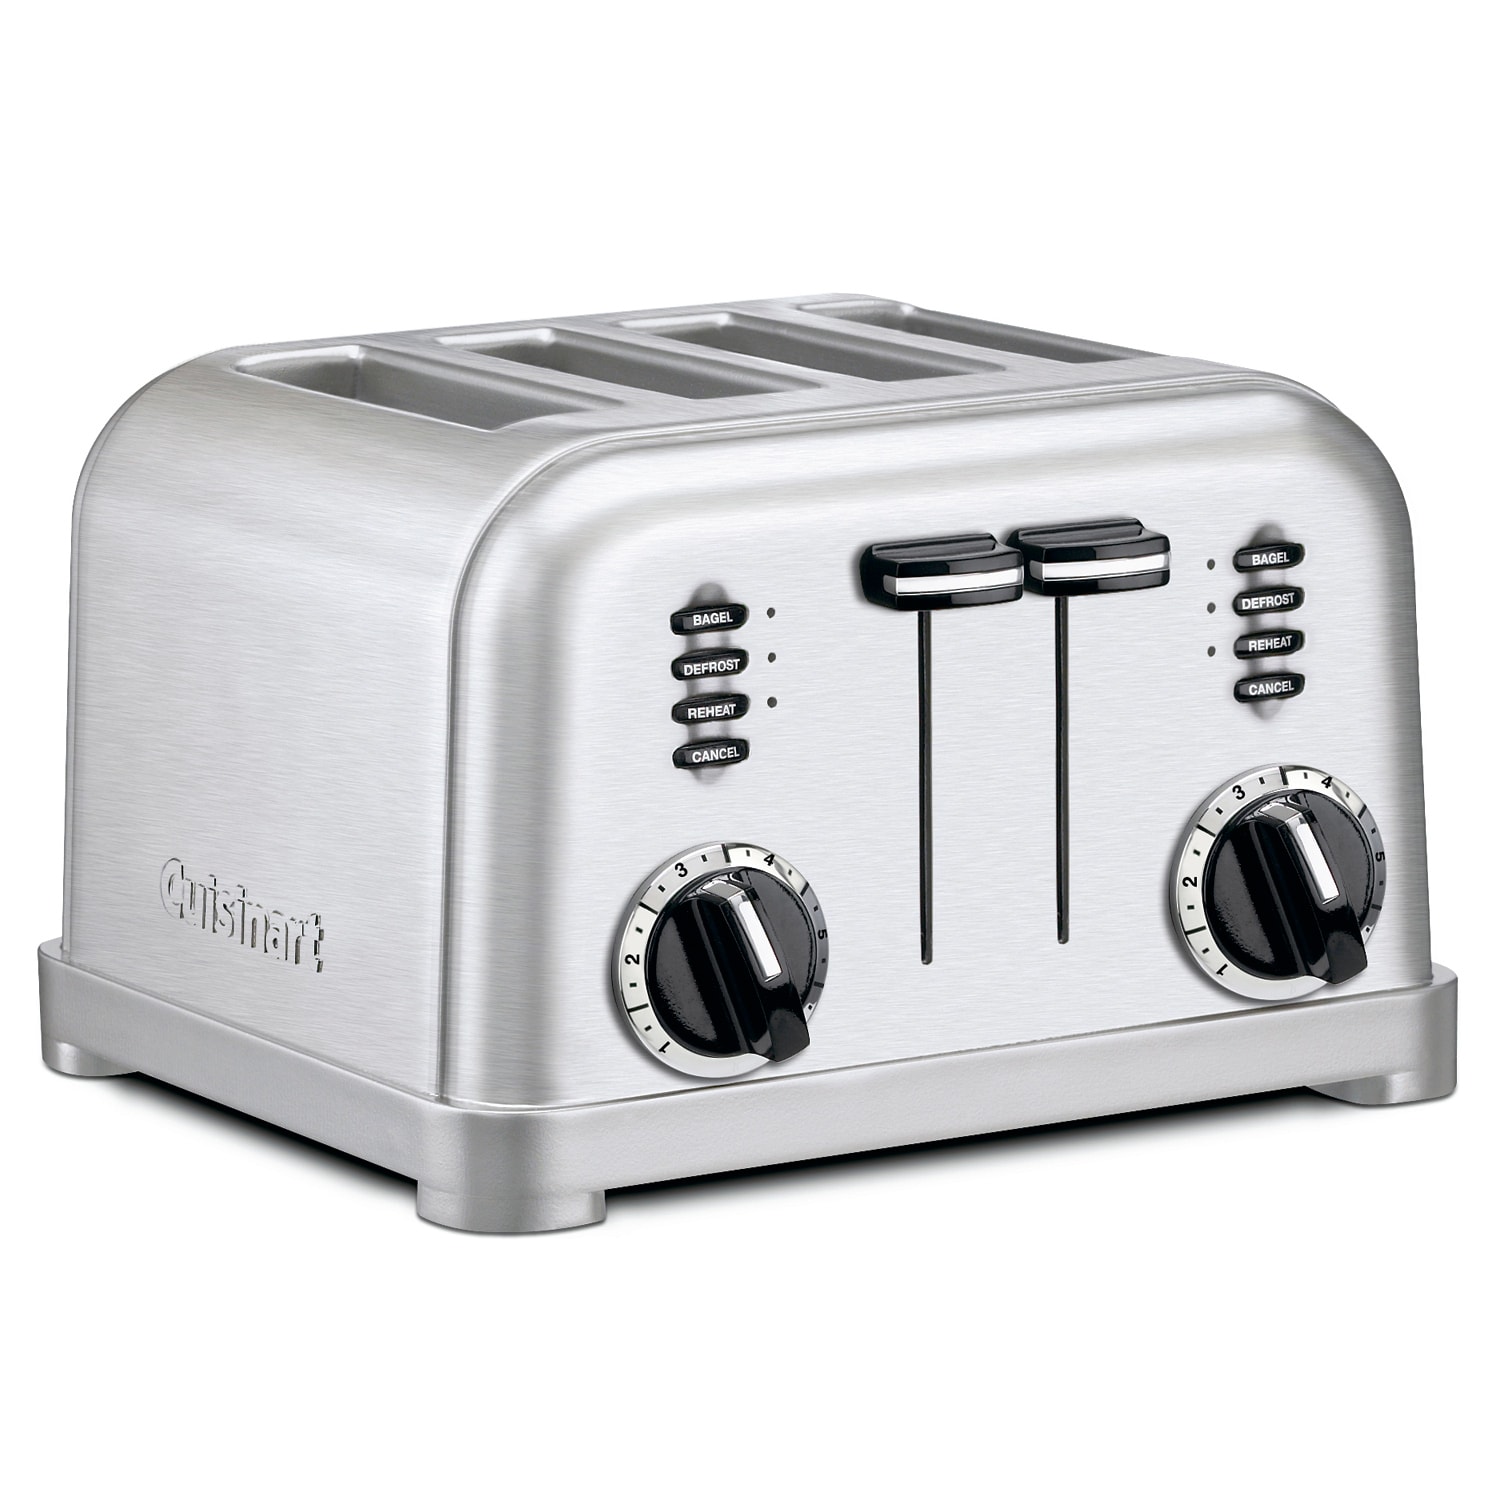 https://ak1.ostkcdn.com/images/products/4216767/Cuisinart-CPT-180-Stainless-Steel-4-slice-Toaster-442df2e3-68d2-45ce-8492-9b9f8bb21317.jpg